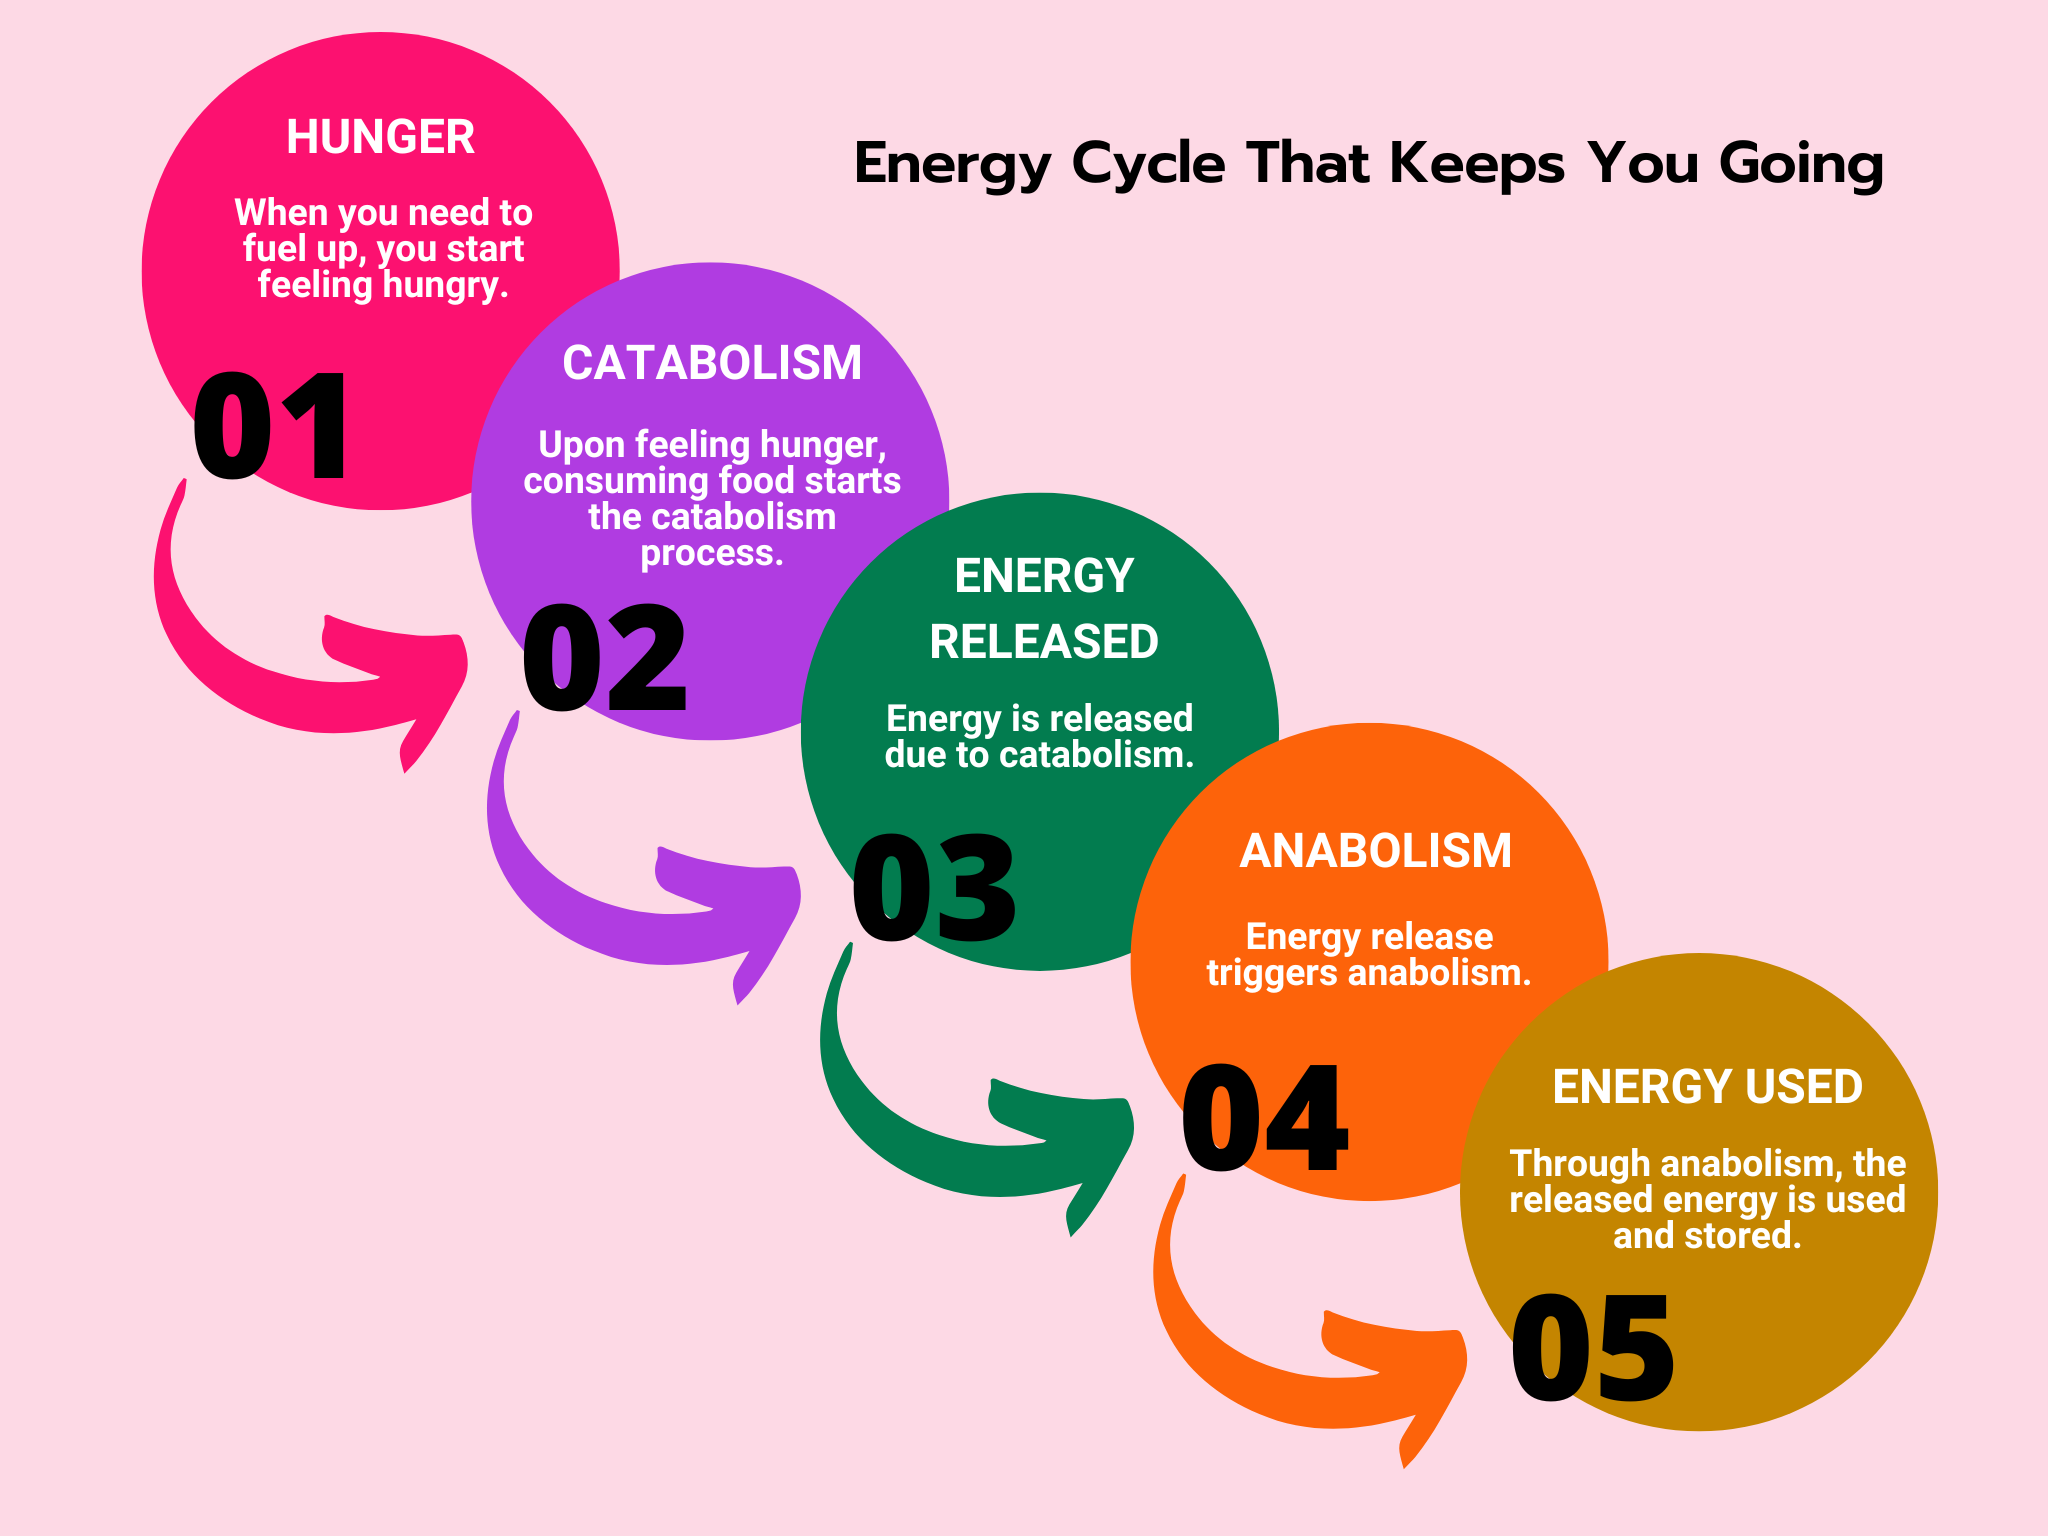 Energy Cycle That Keeps You Going